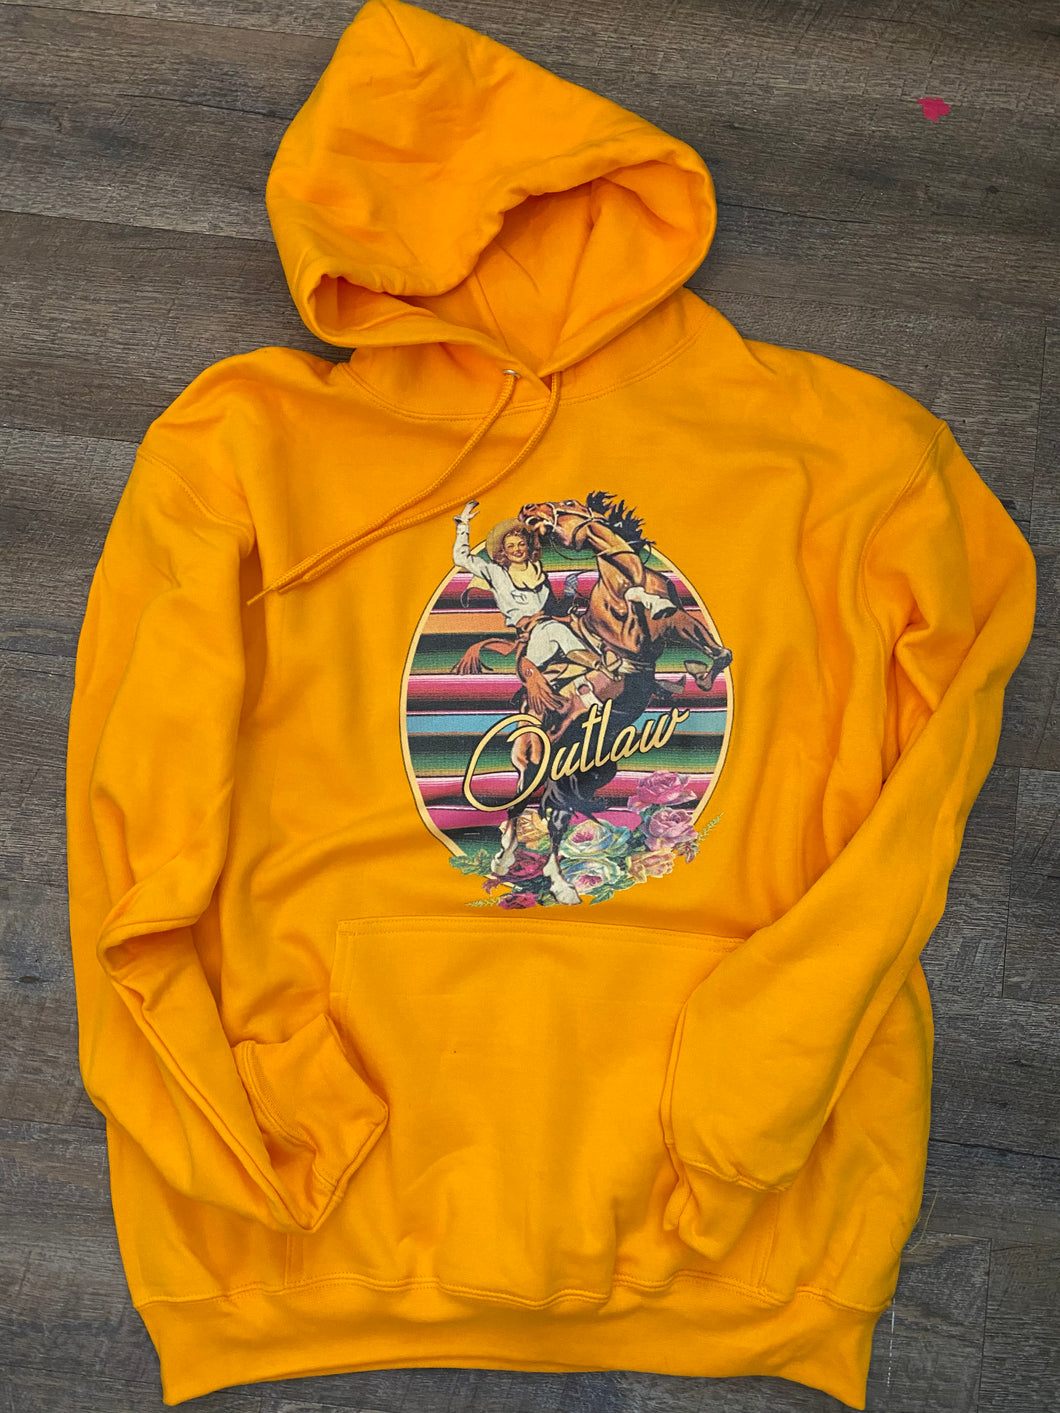 Oval serape outlaw bronco // yellow graphic hoodie or tee - Mavictoria Designs Hot Press Express